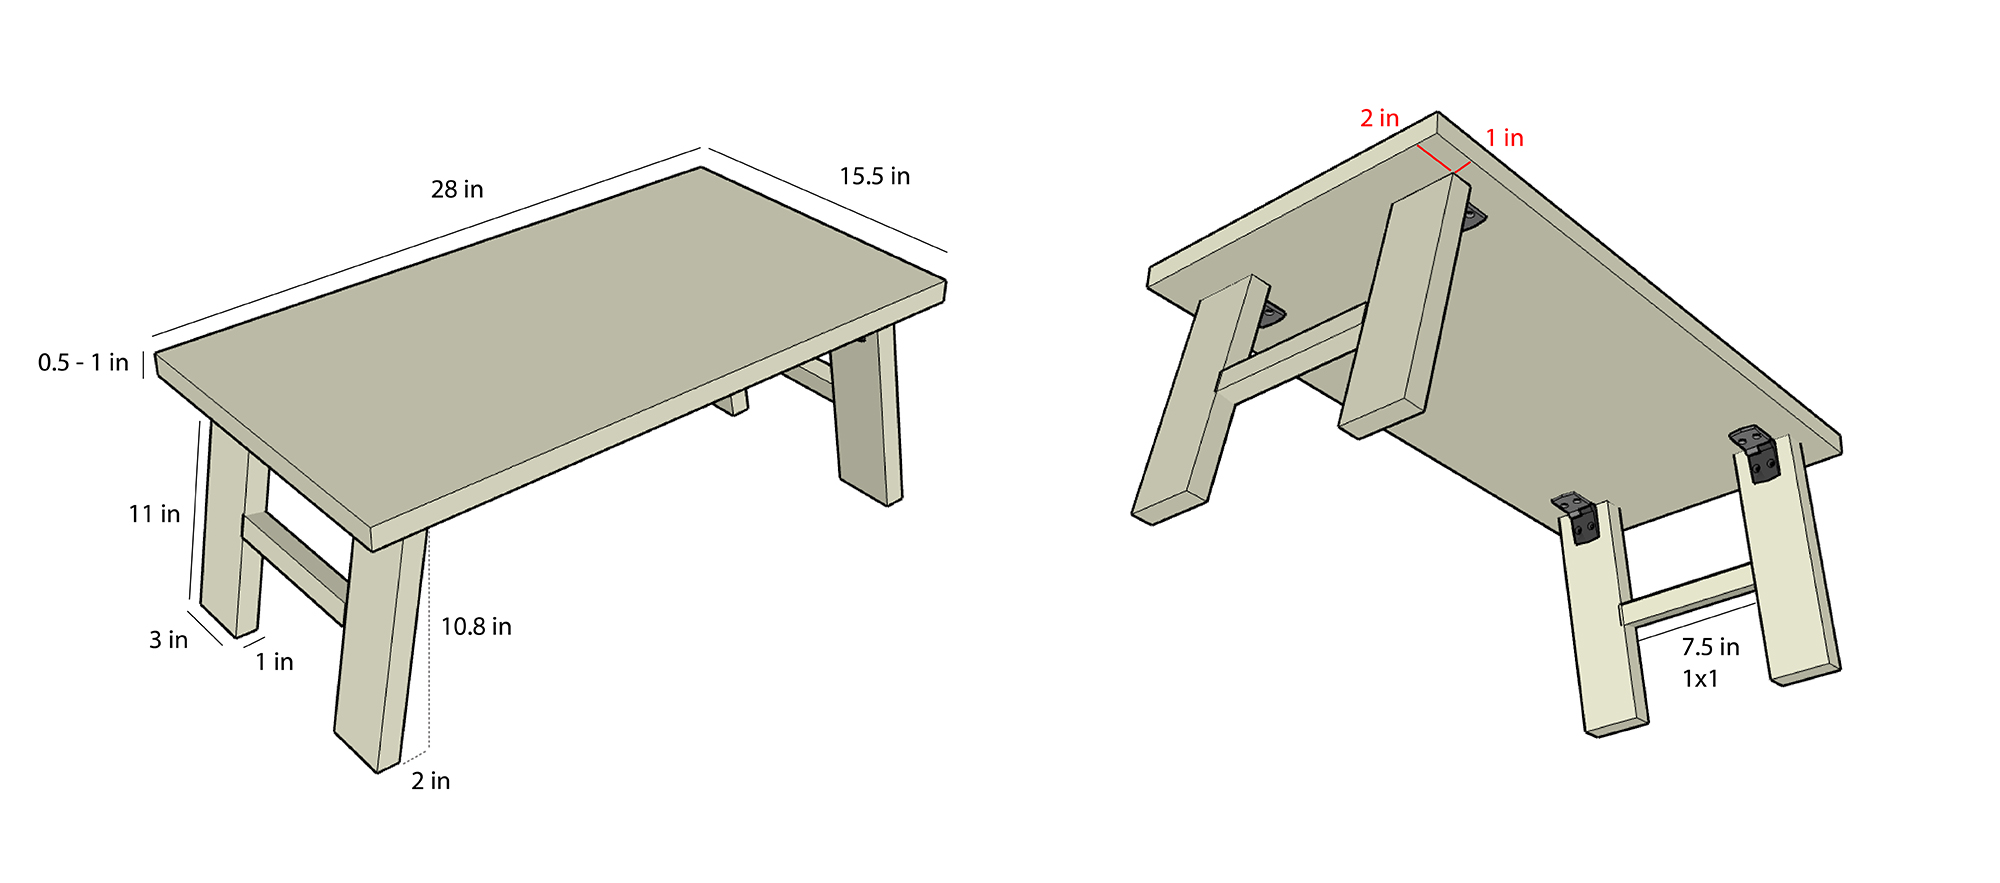 A mockup of the riser on SketchUp